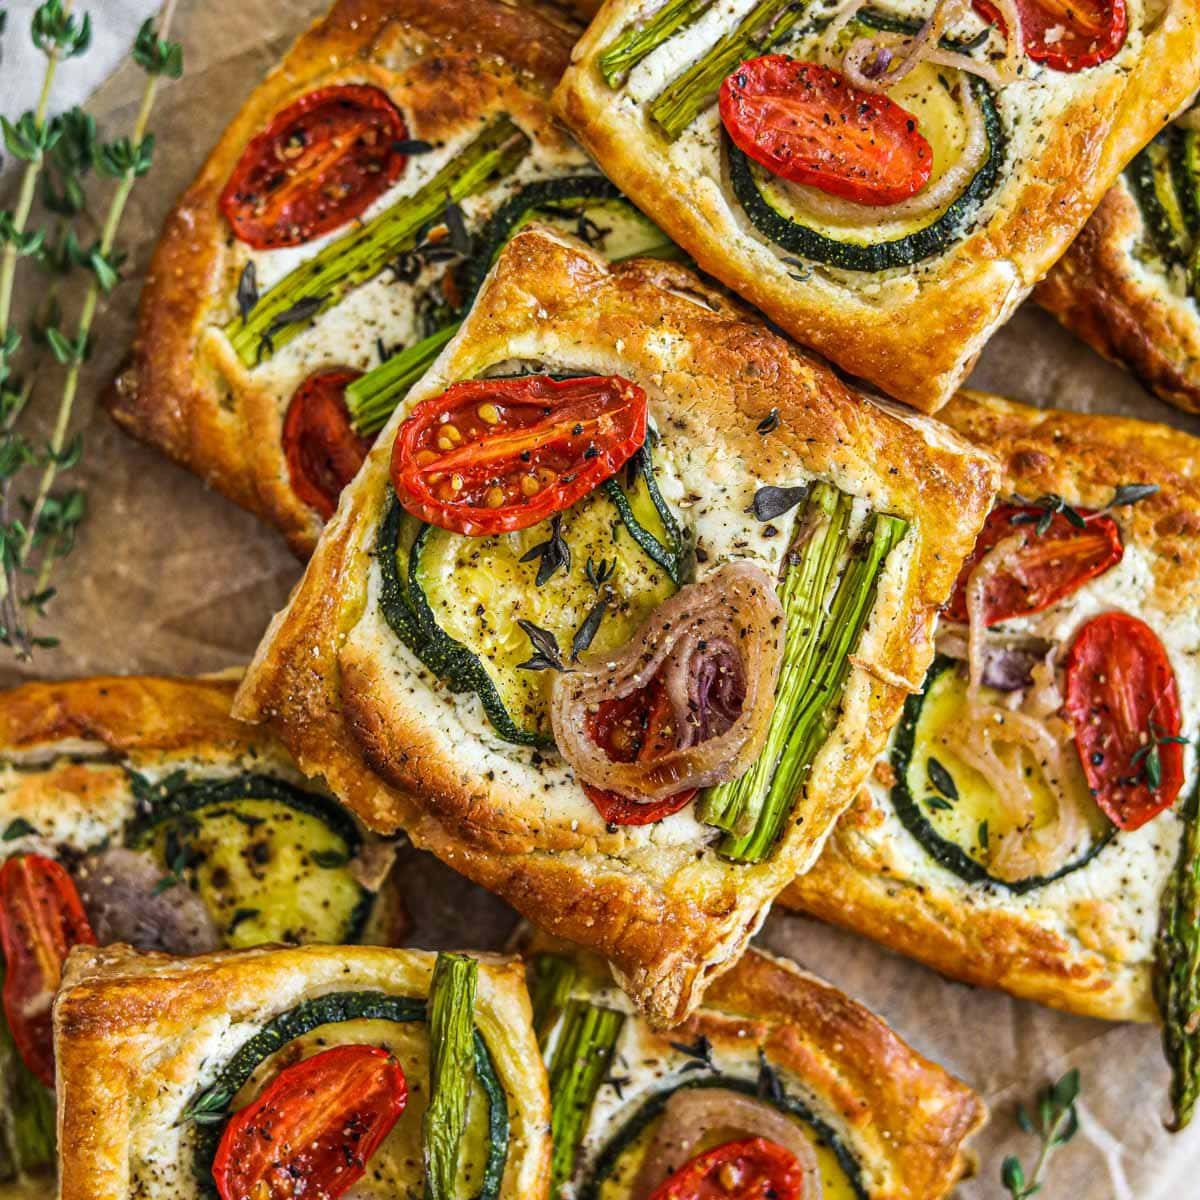 Puff pastry vegetable tarts with herbed goat cheese, cherry tomatoes, asparagus, shallots, and zucchini.